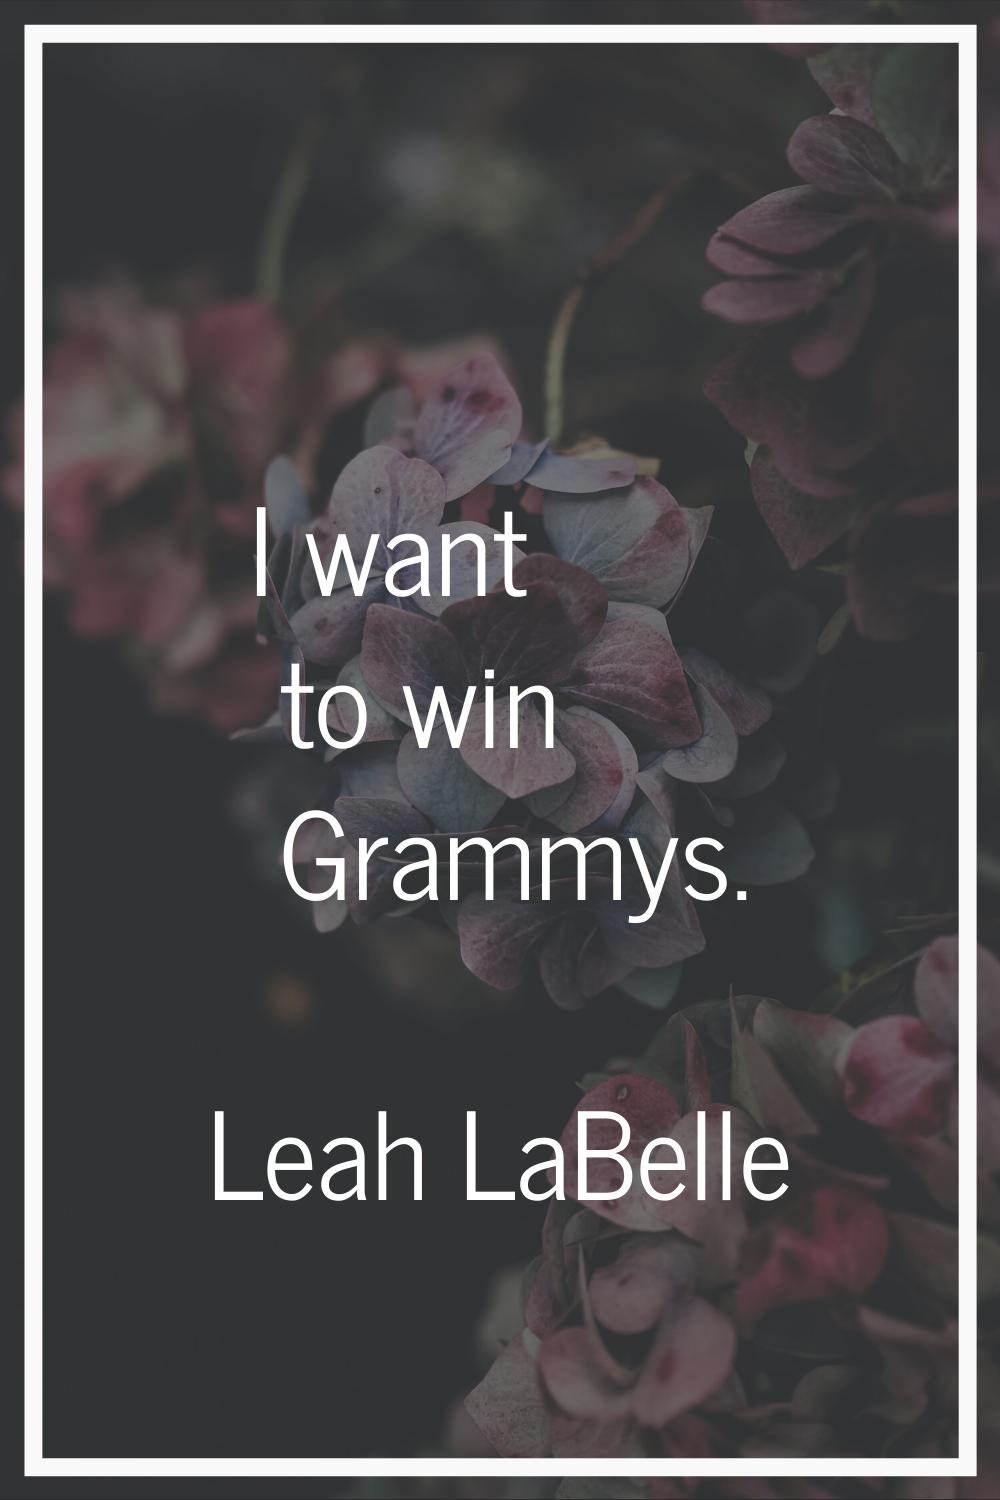 I want to win Grammys.